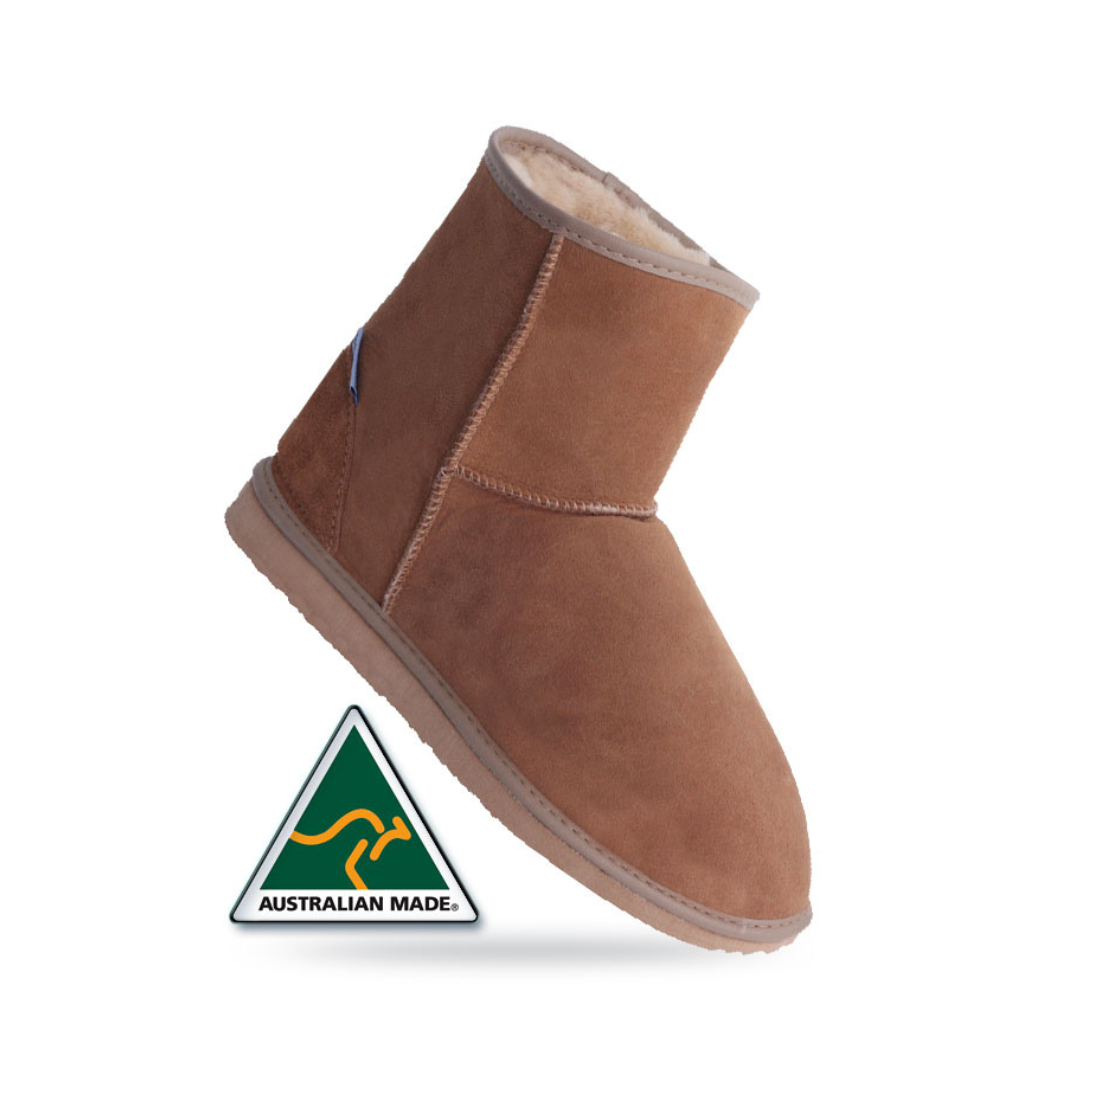 Australian made blue sheep ankle ugg boots in chestnut